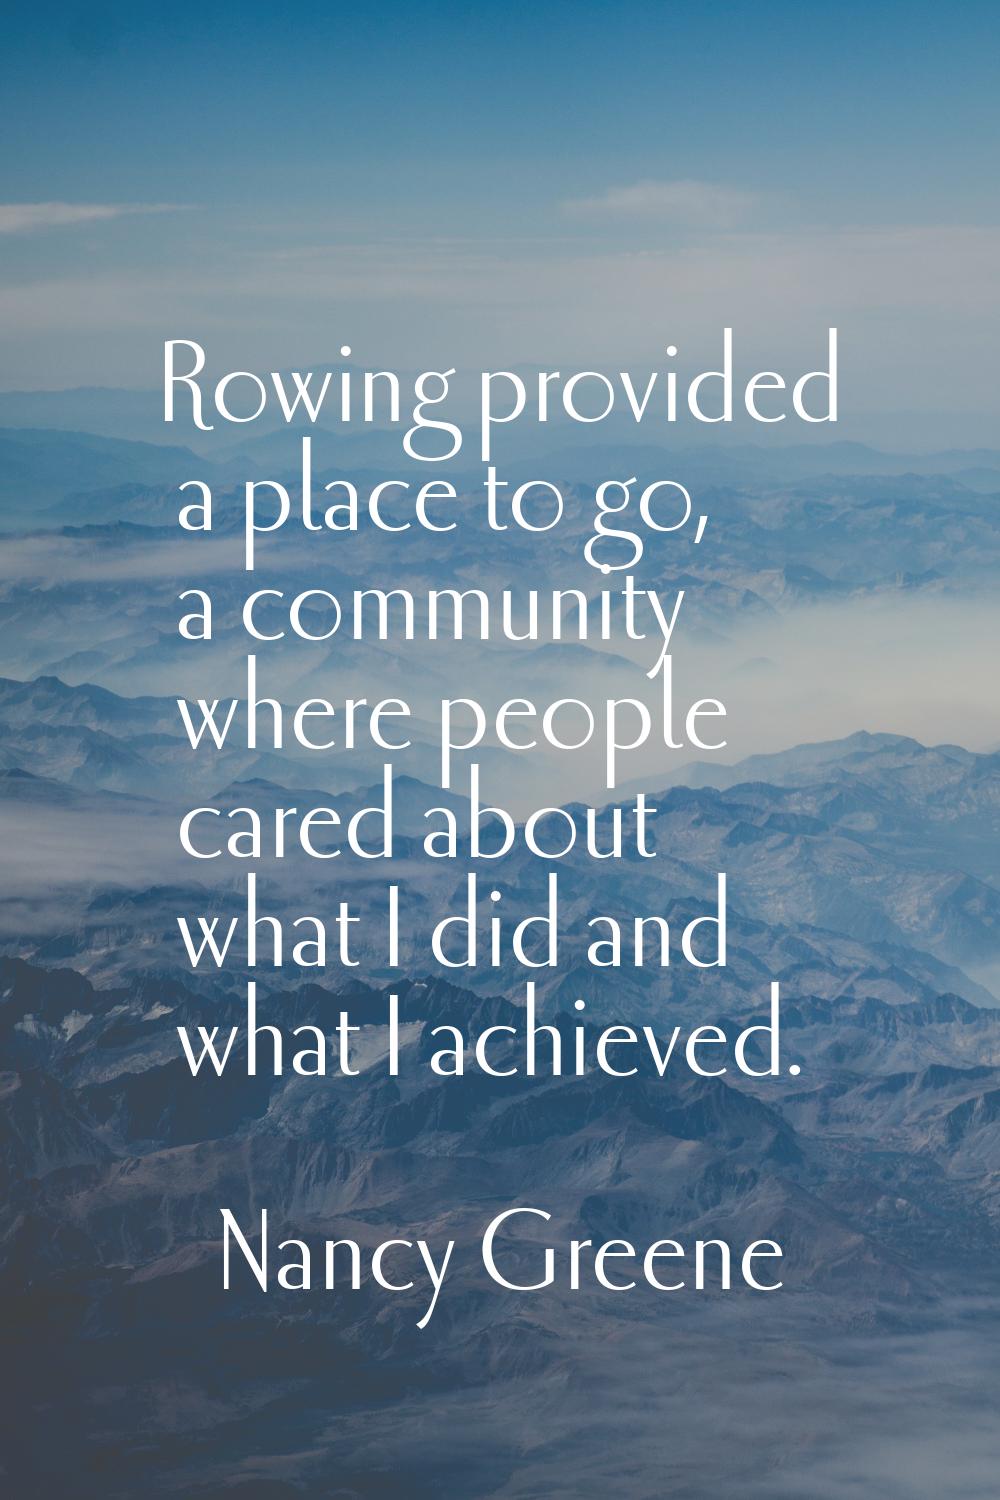 Rowing provided a place to go, a community where people cared about what I did and what I achieved.